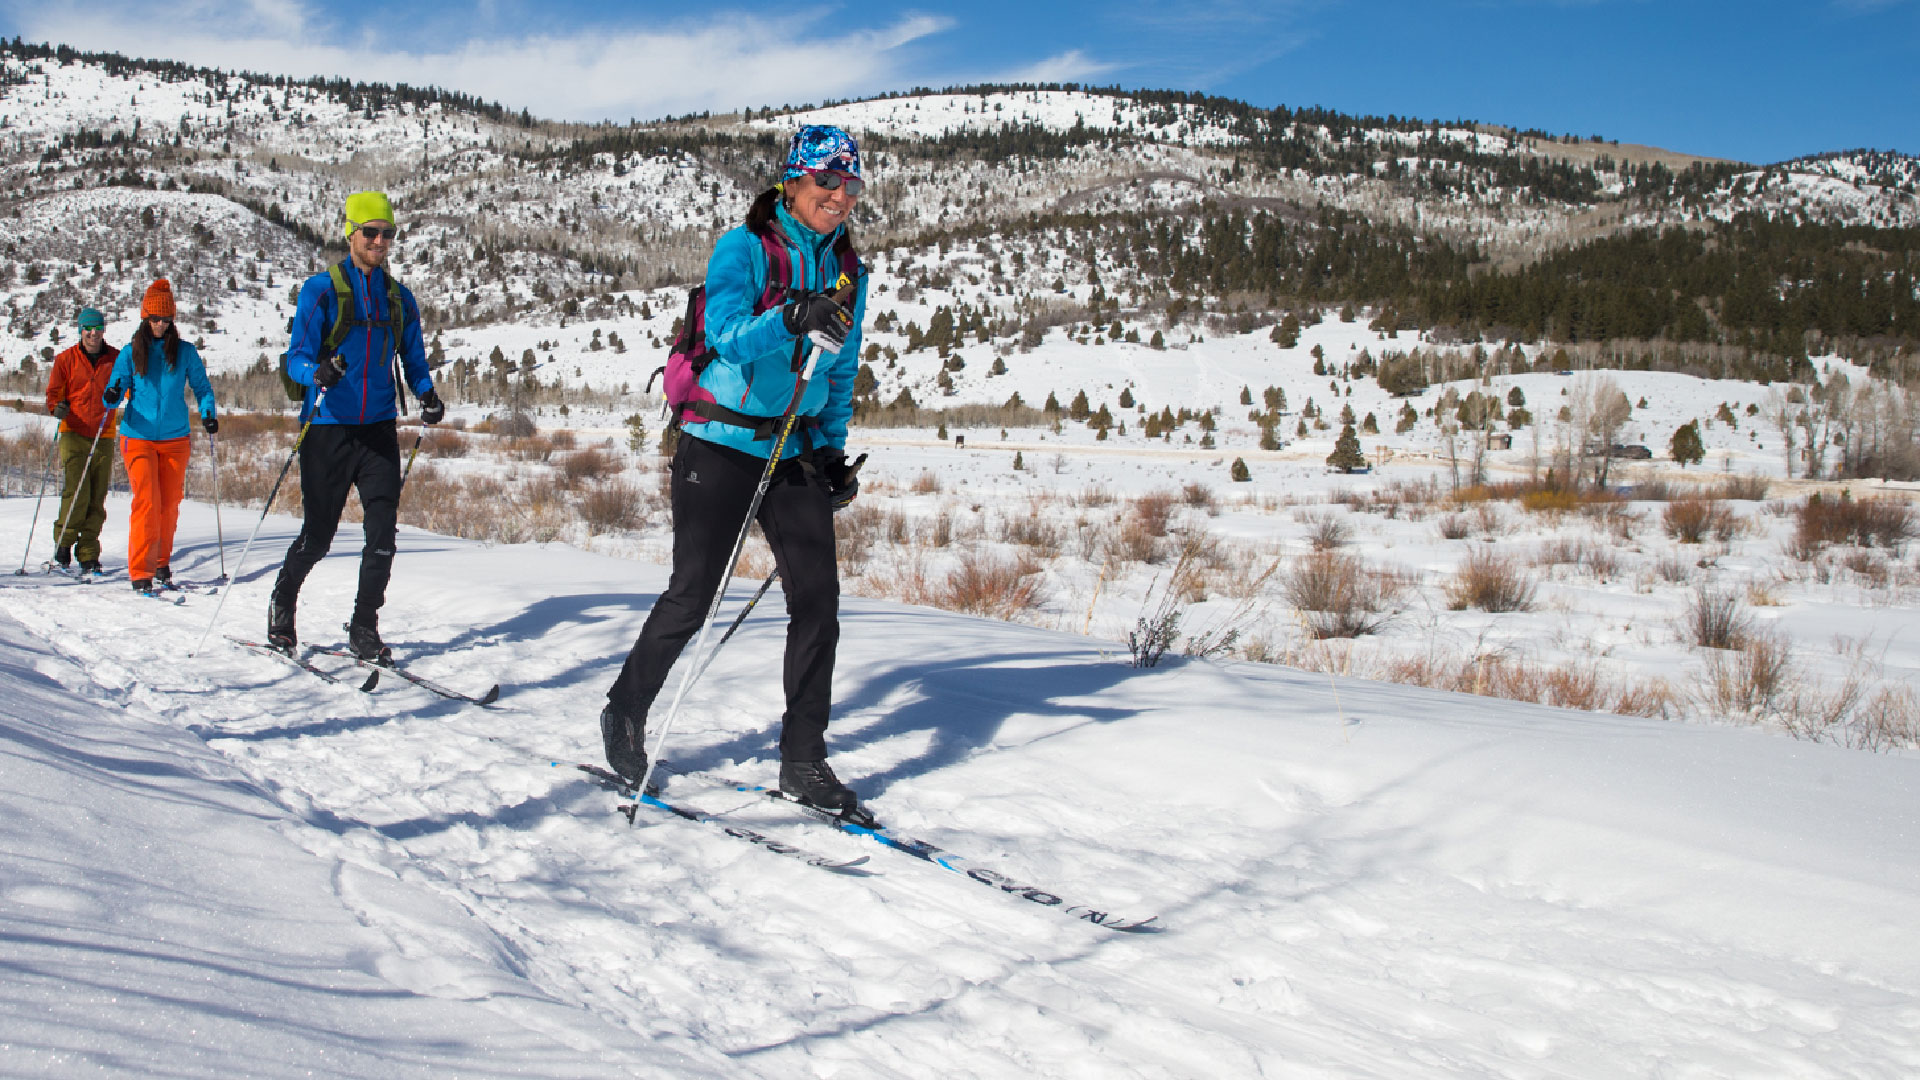 Guided Backcountry Cross Country Skiing Tour from White Pine Touring in Park City, UT.